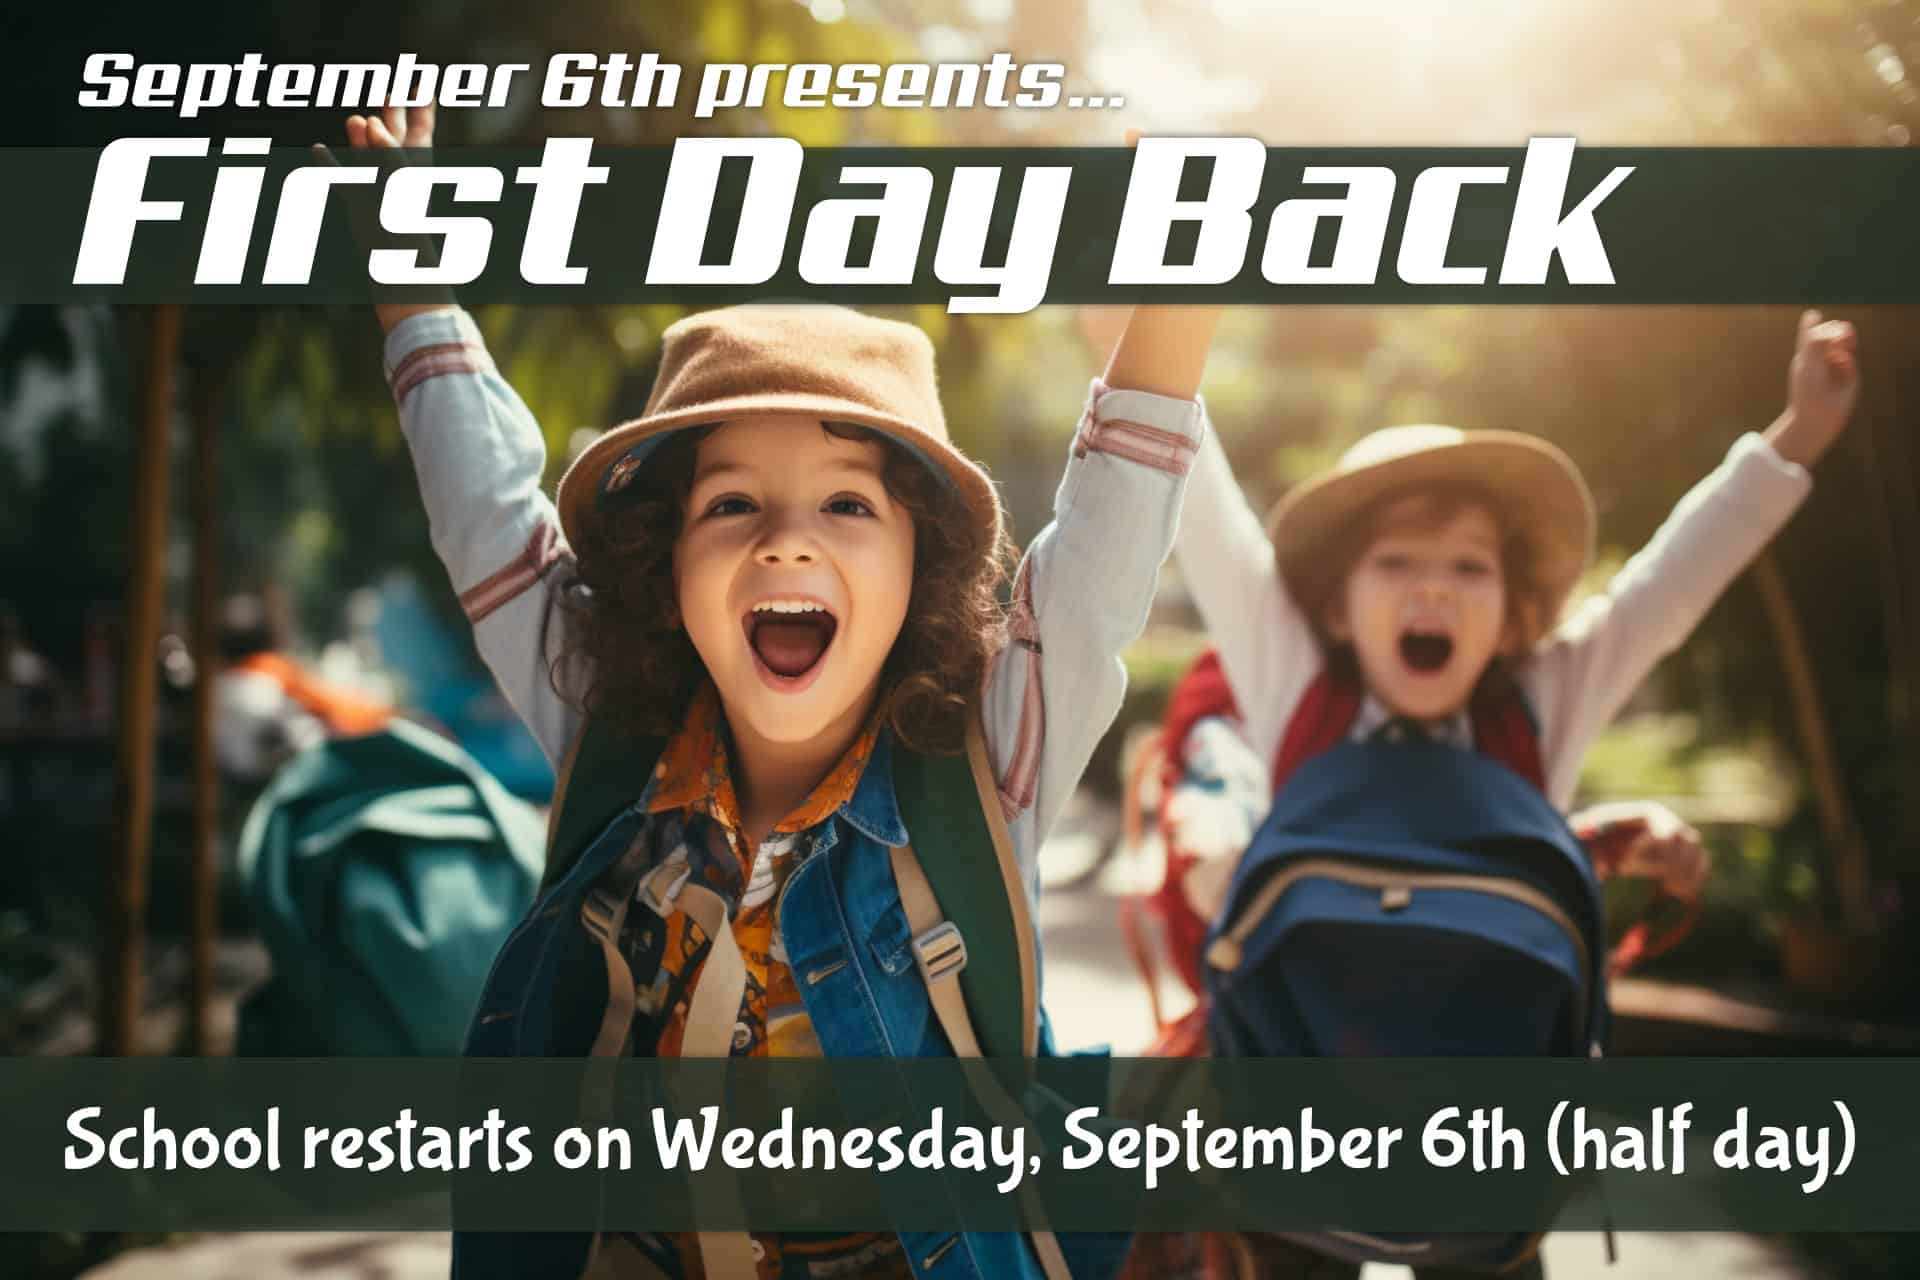 The first day back at school is September 6th! It will be a half day for students.